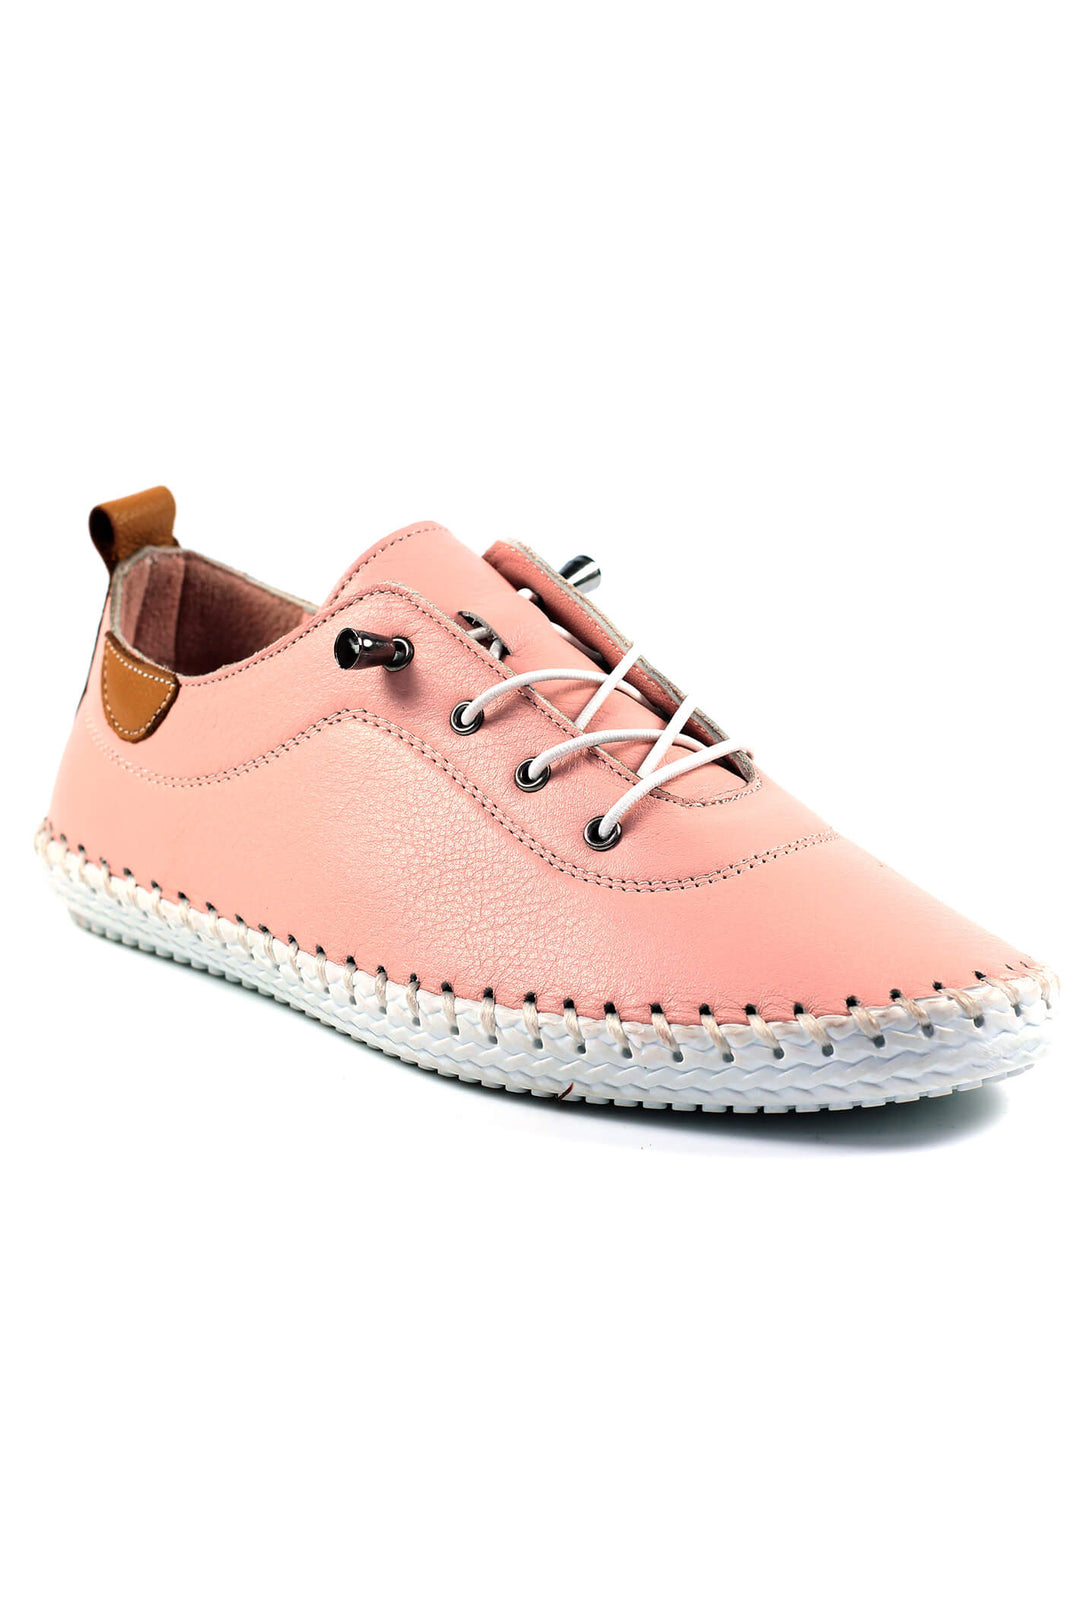 Lunar St Ives FLE030 Leather Pink Plimsoll - Shirley Allum Boutique